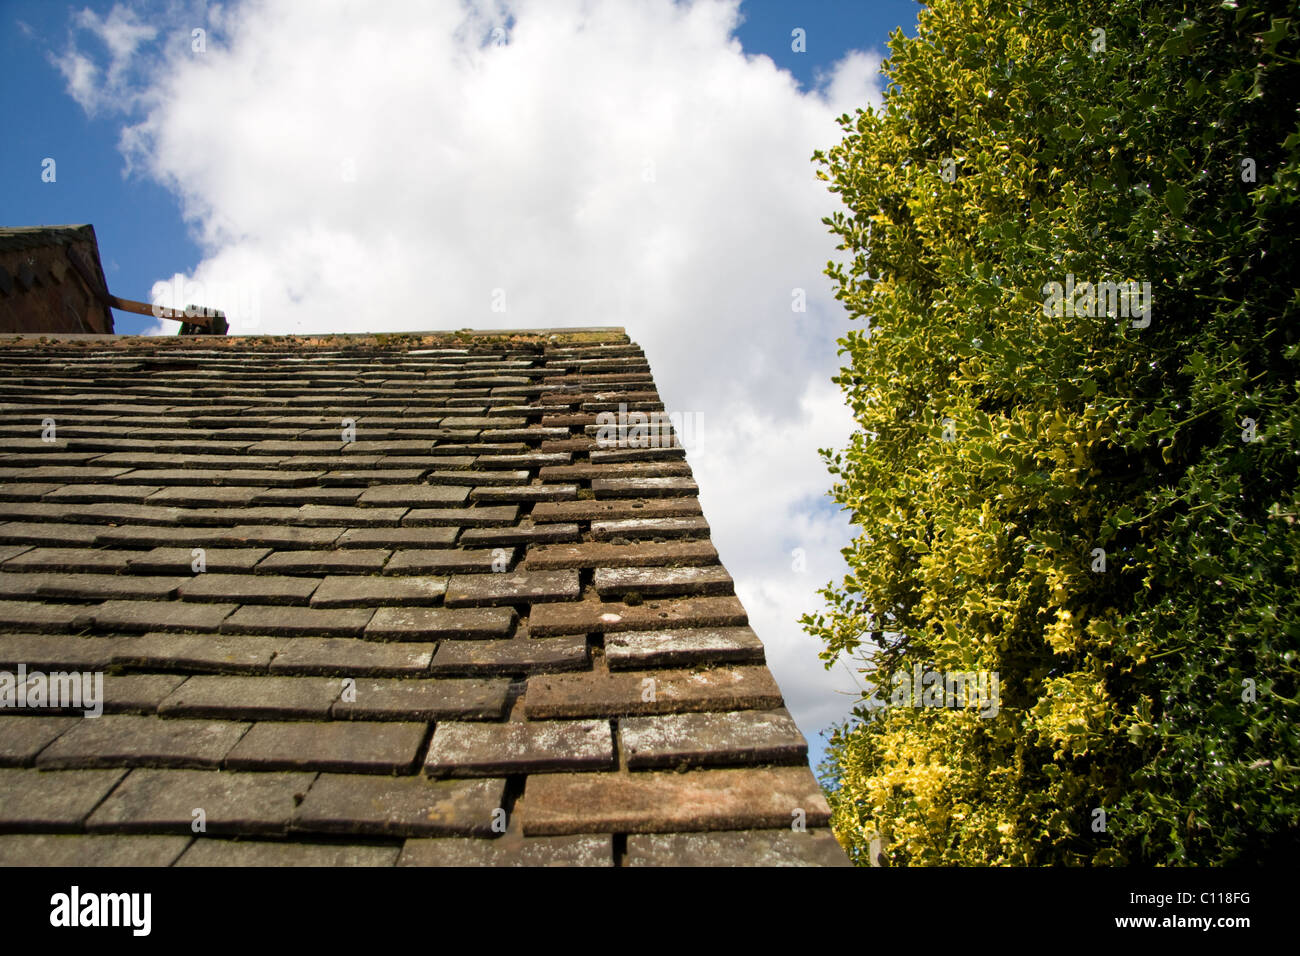 Tile roof and green tree on a cloudy day. Stock Photo